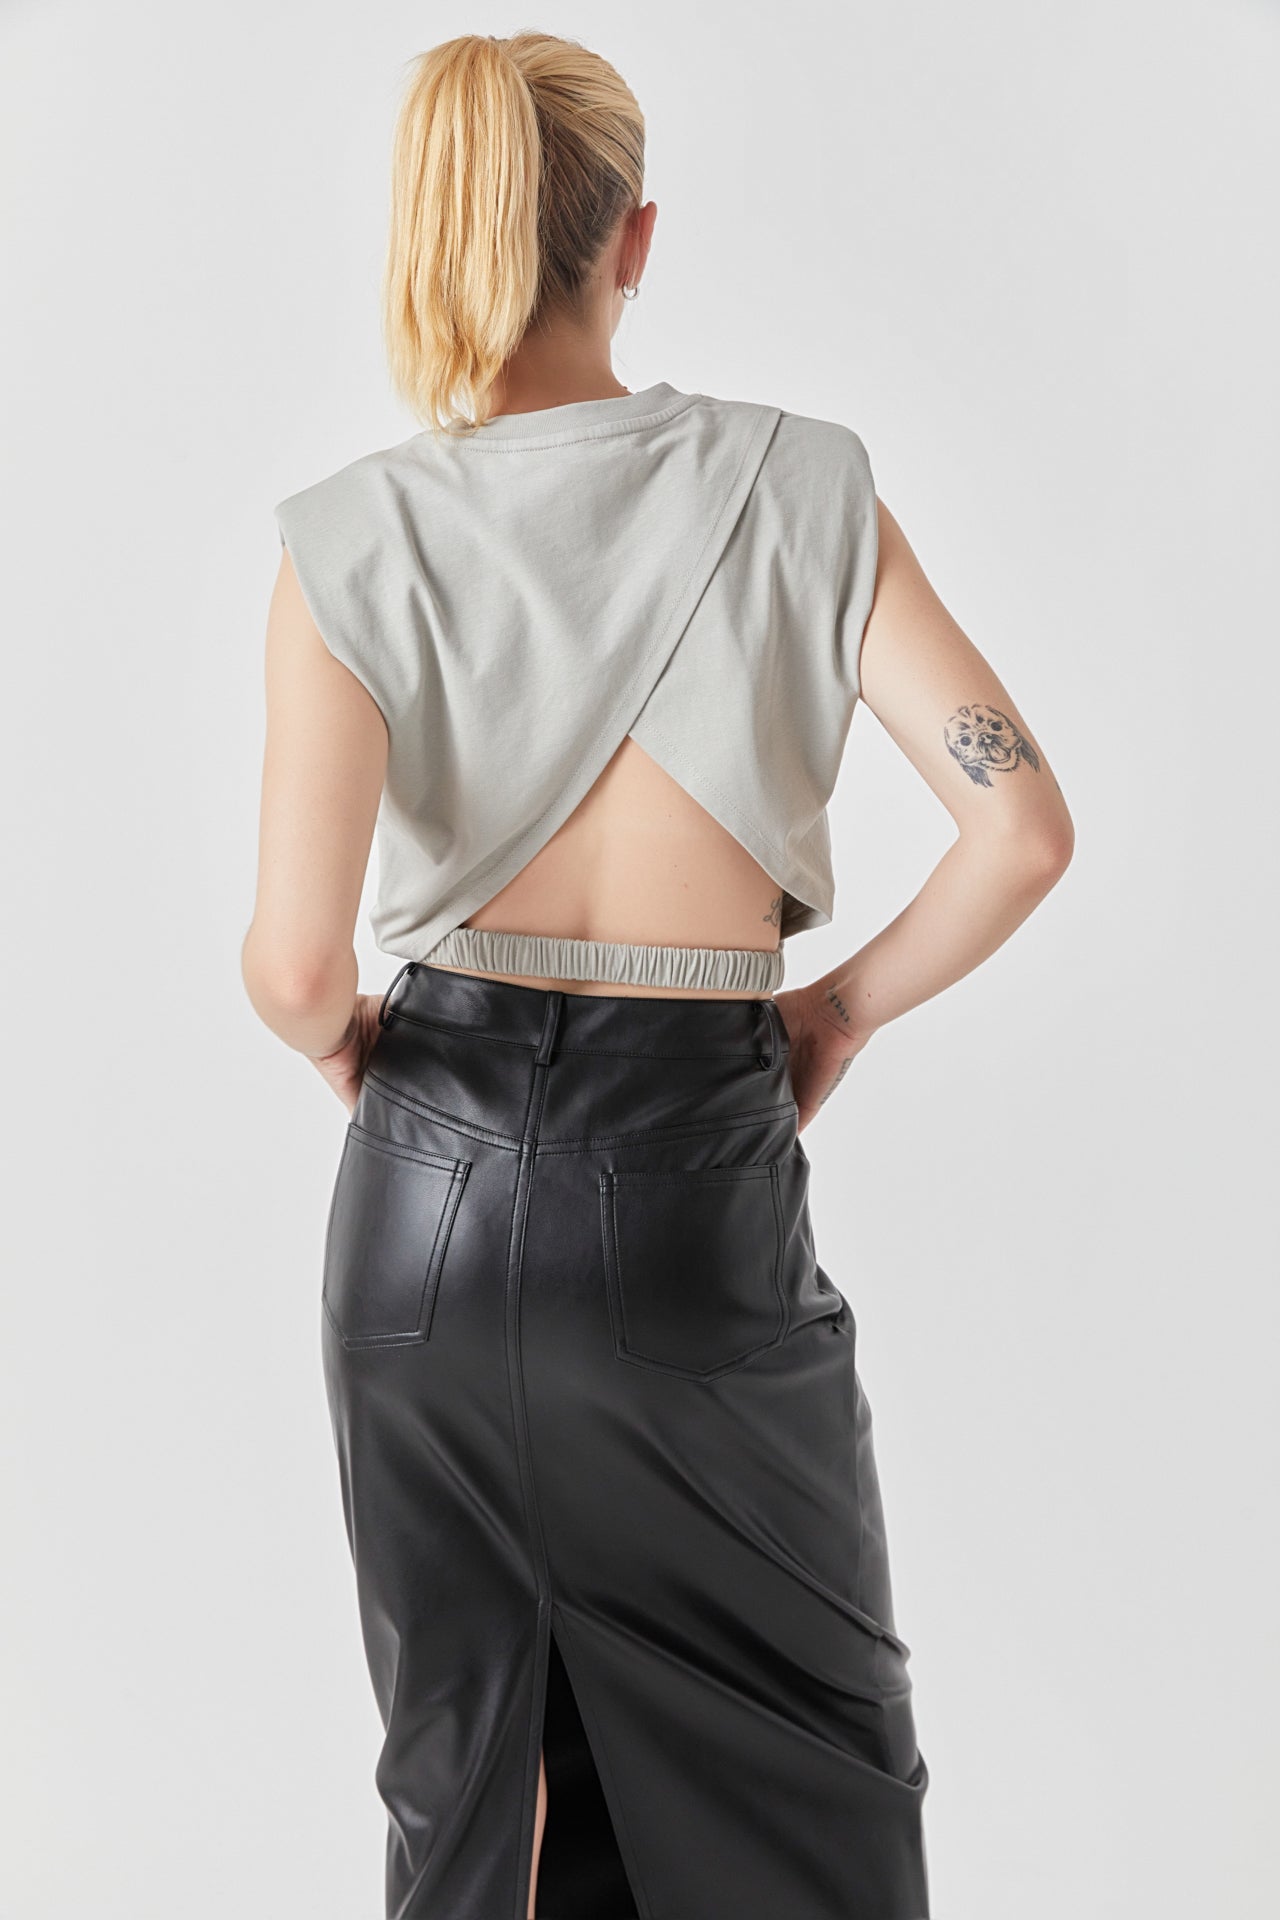 GREY LAB - Open Back Cropped Top - TOPS available at Objectrare